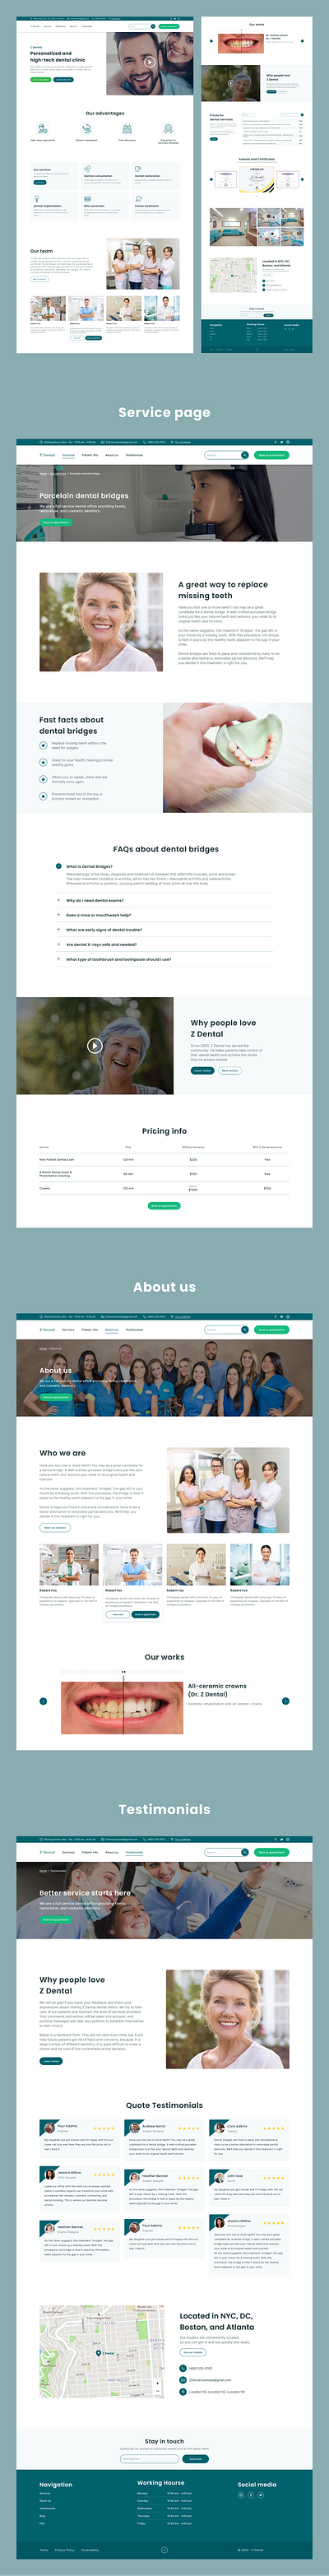 Z Dental about us appointment client customer faq footer header main section pricing search services testimonials ui user ux web